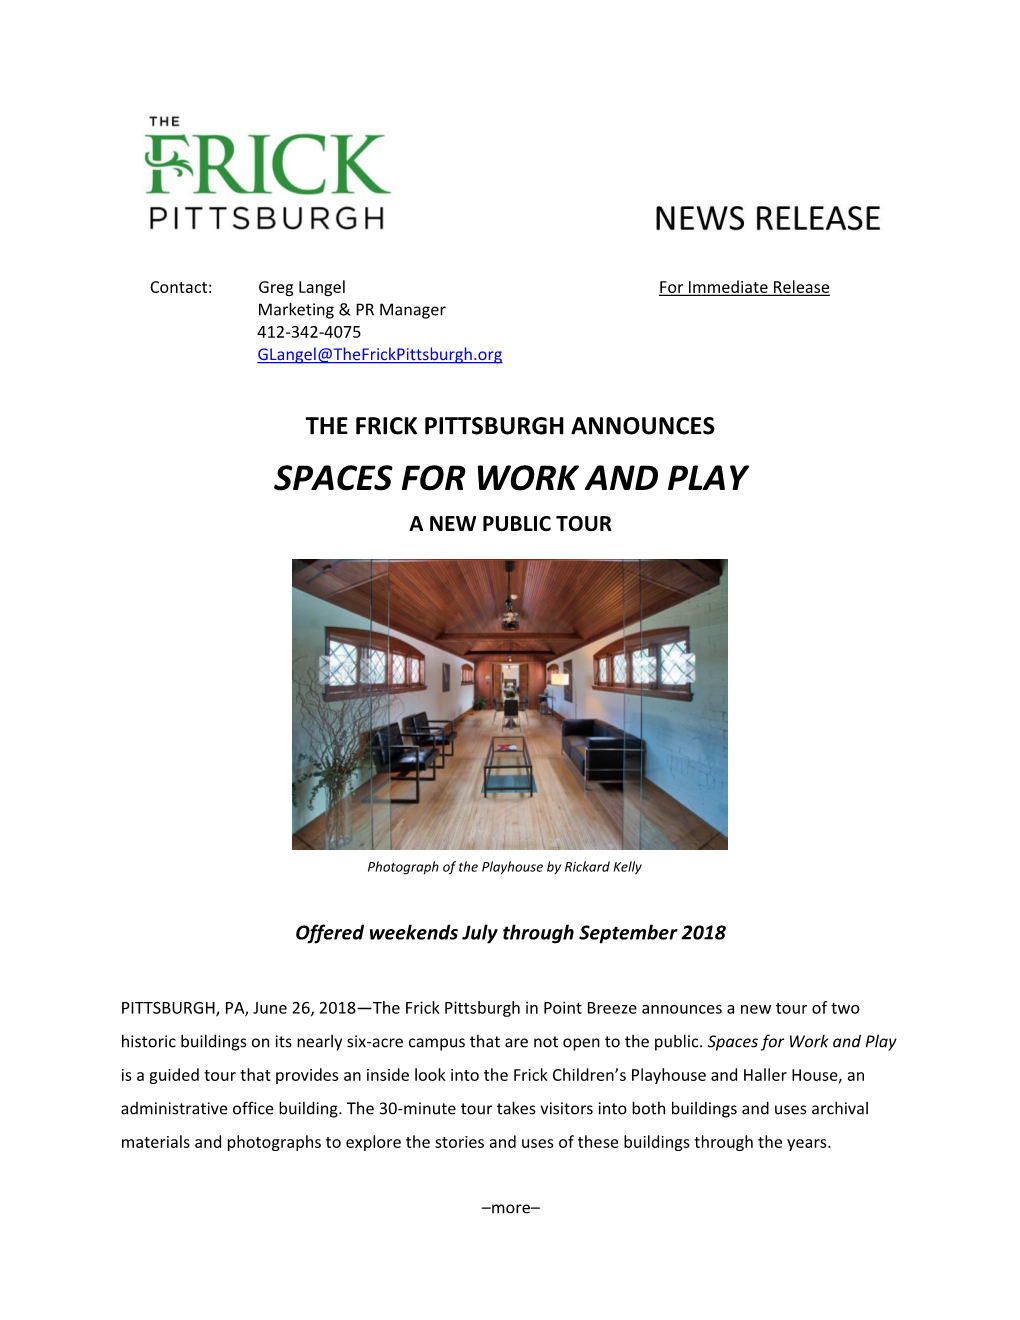 The Frick Pittsburgh Announces Spaces for Work and Play, a New